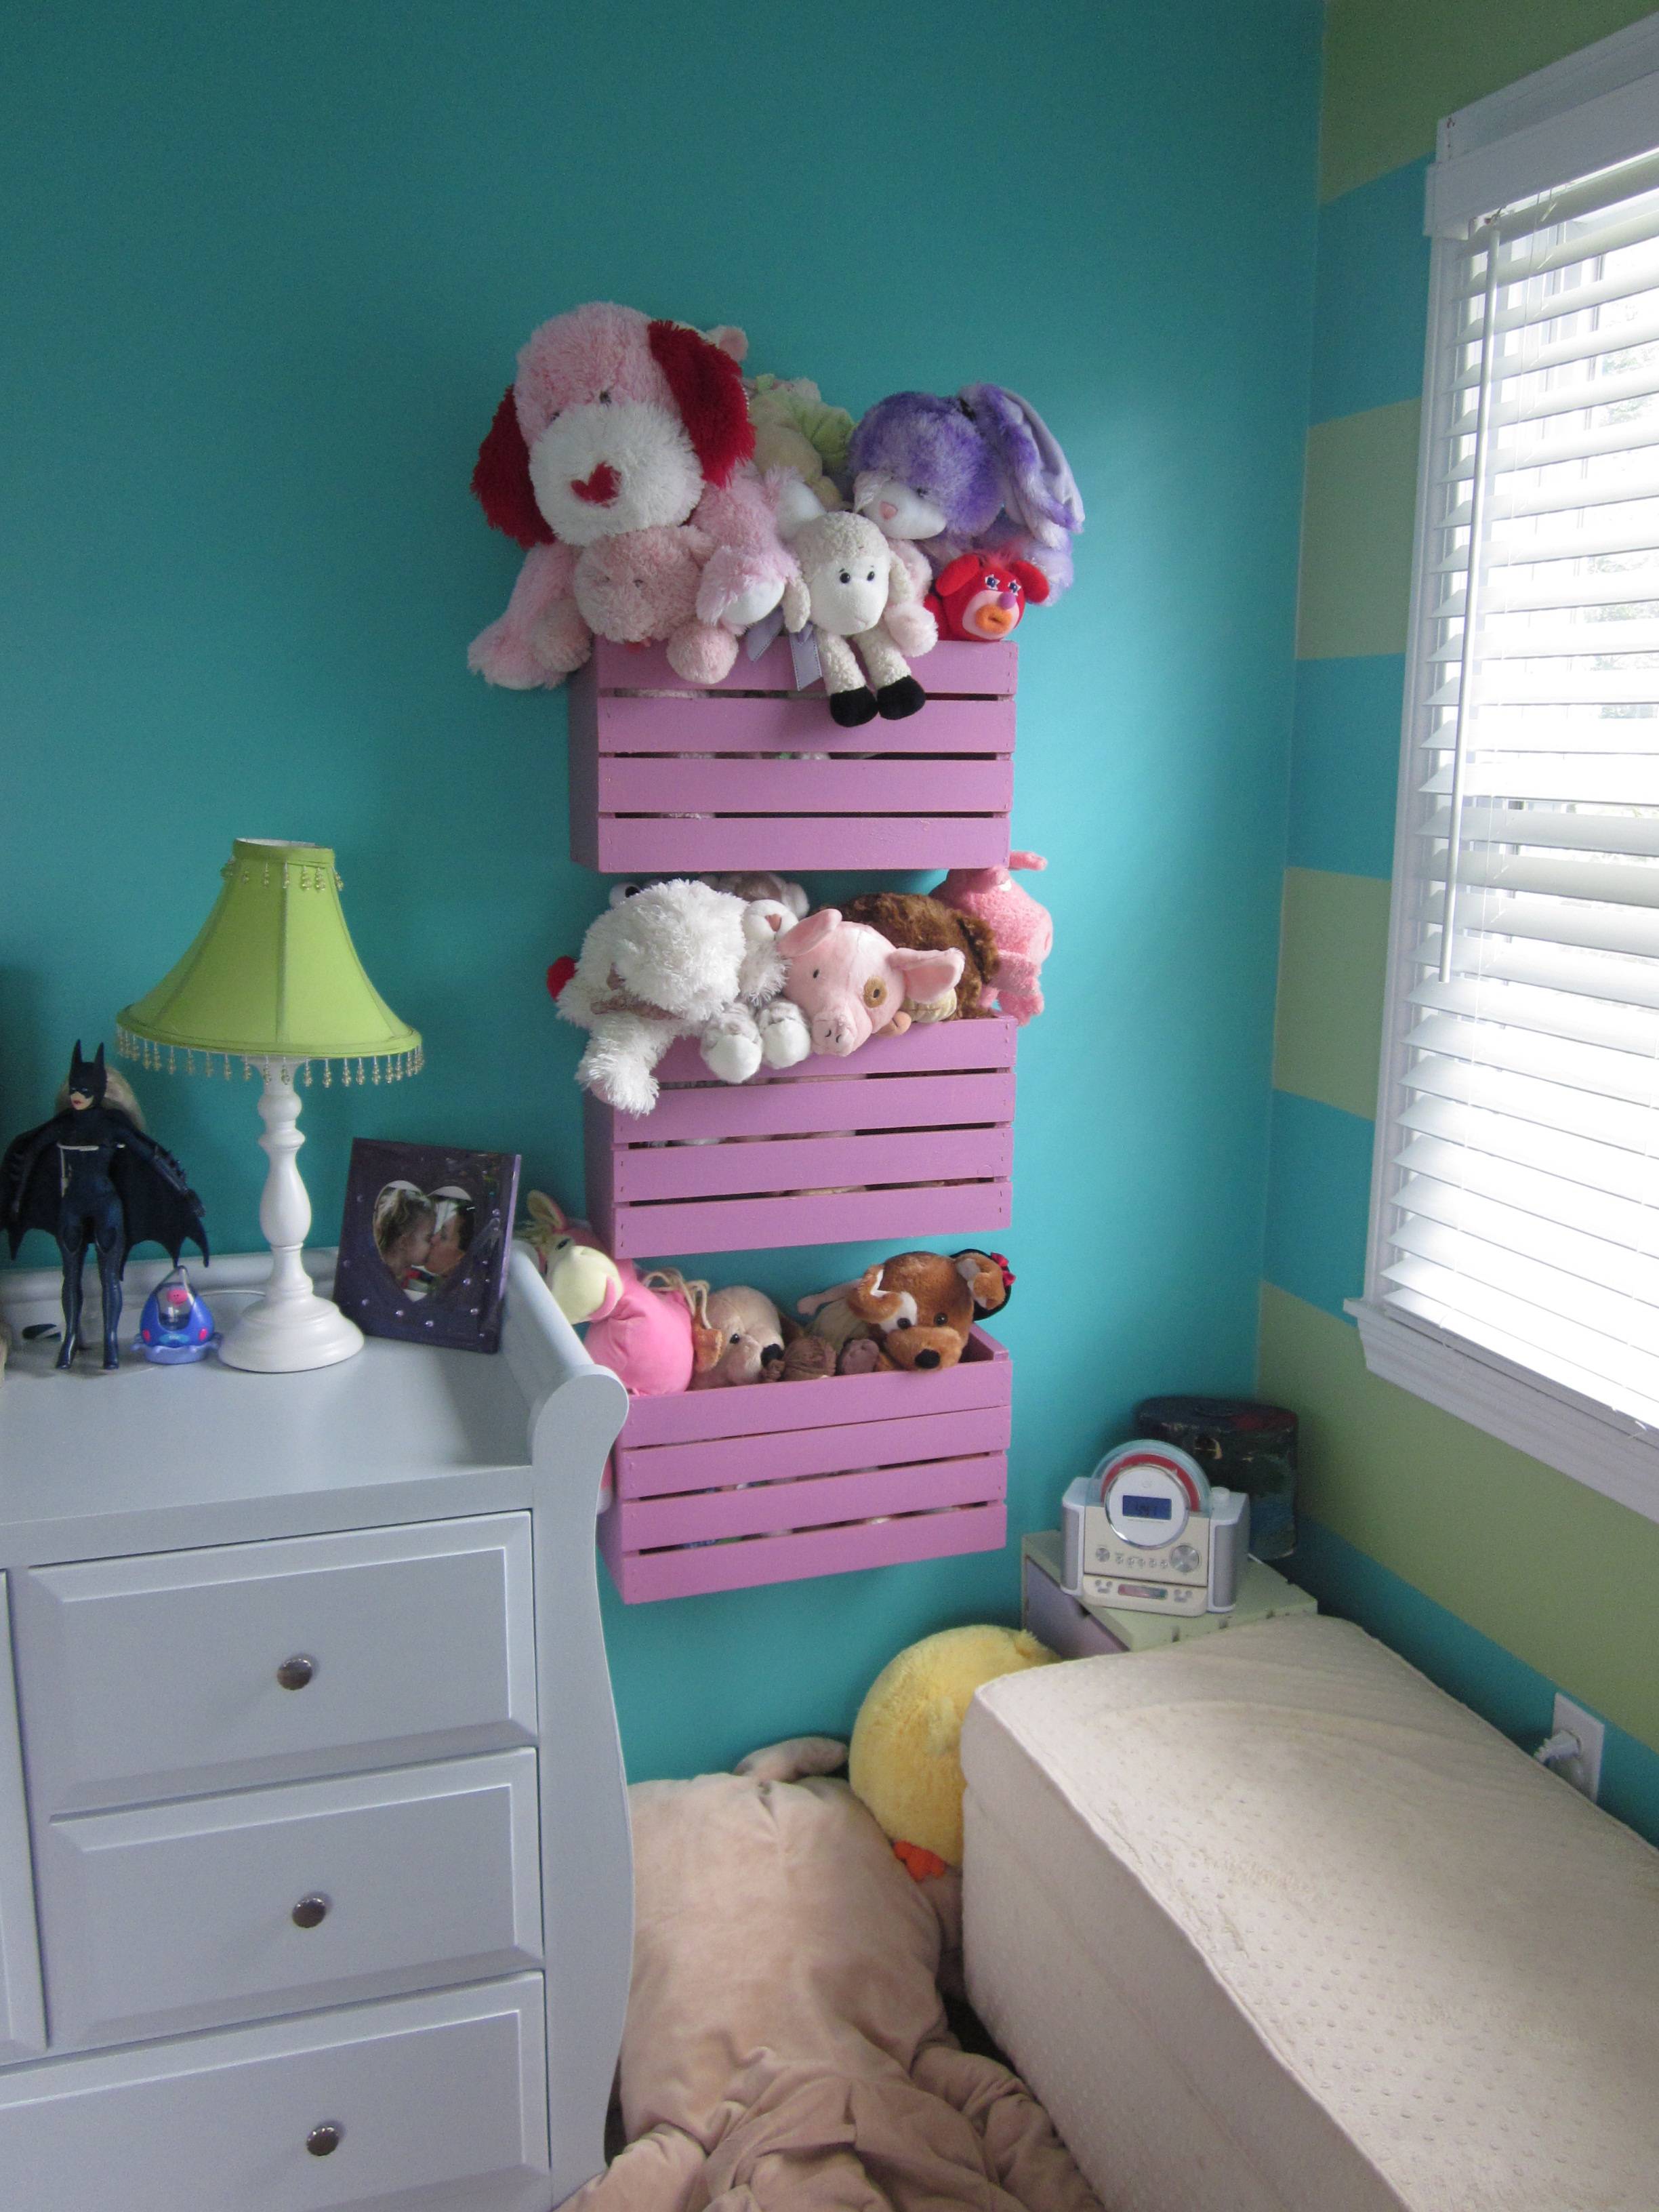 15 Functional and Fun DIY Ideas How to Organize and Store Stuffed Animal Toys